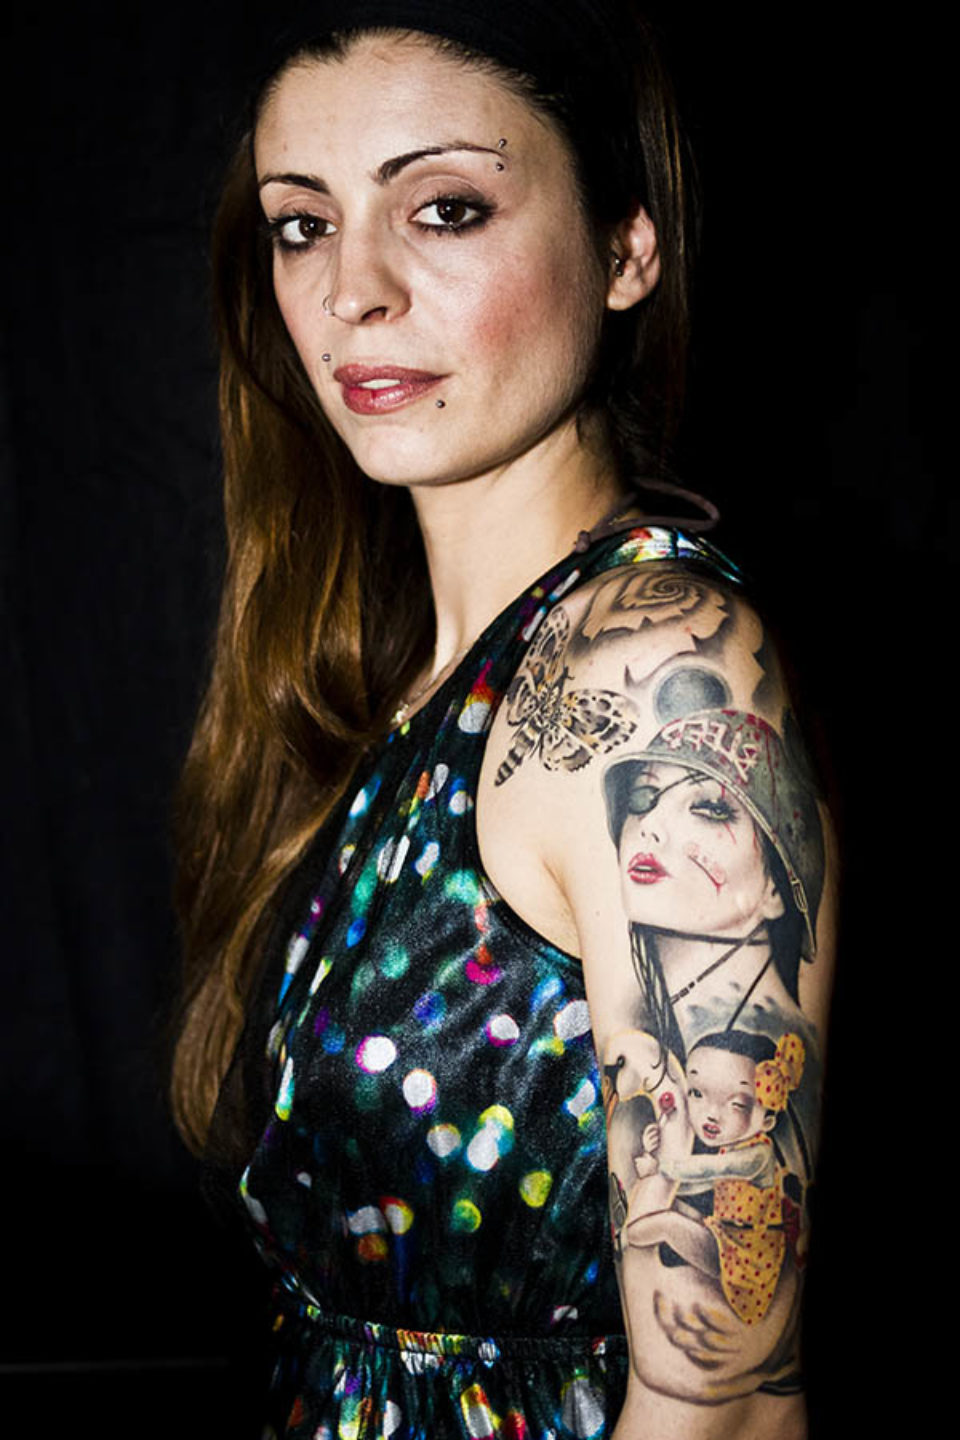 Woman with a tattooed arm